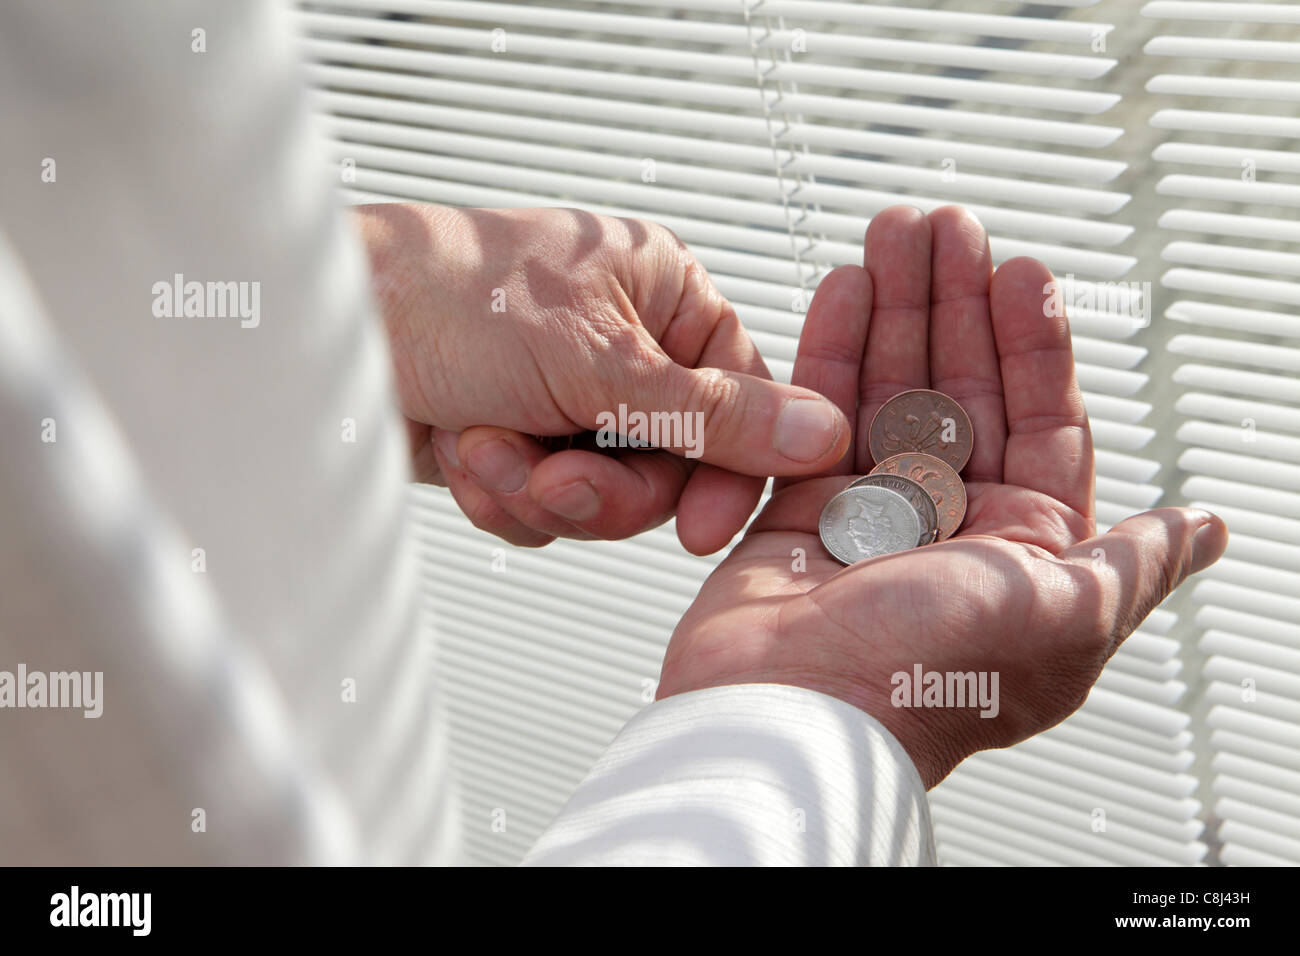 living on a tight budget, counting the pennies coins during a recession making ends meet, close-up of hands Stock Photo